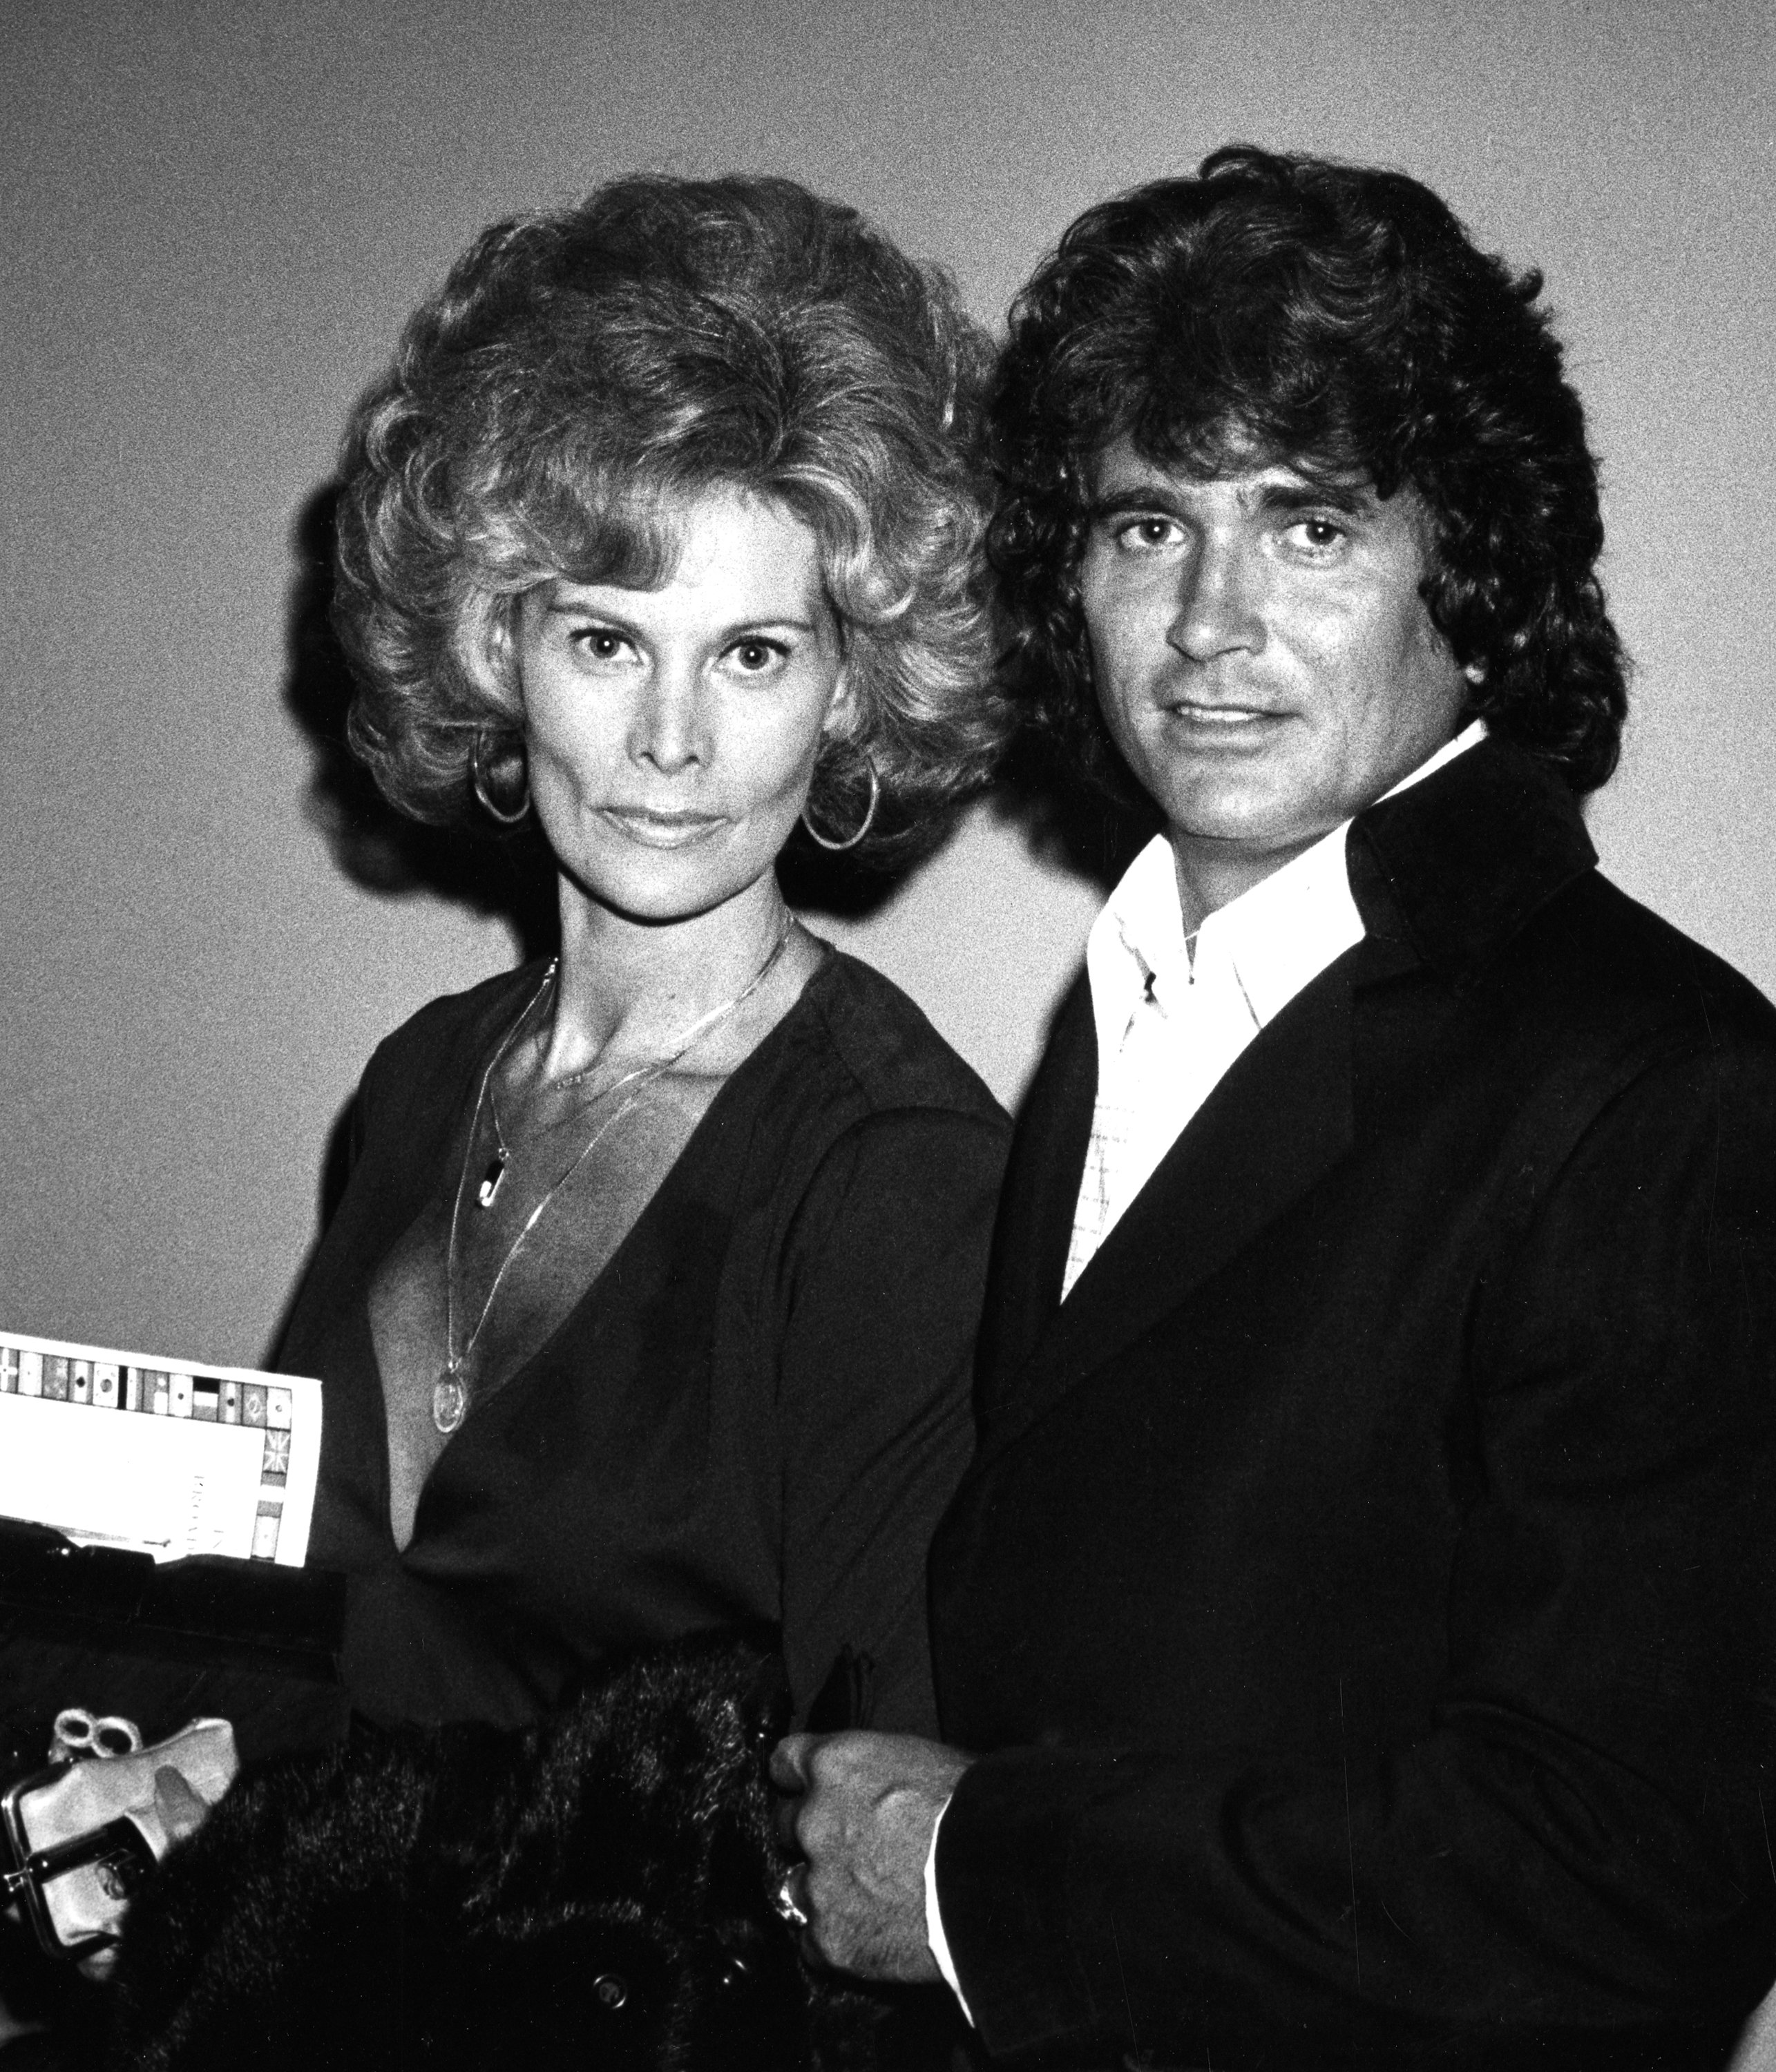 Actor Michael Landon and wife Lynn Noe attend 16th Annual International Broadcasting Awards on March 4, 1976 at Century Plaza Hotel in Los Angeles, California. | Source: Getty Images